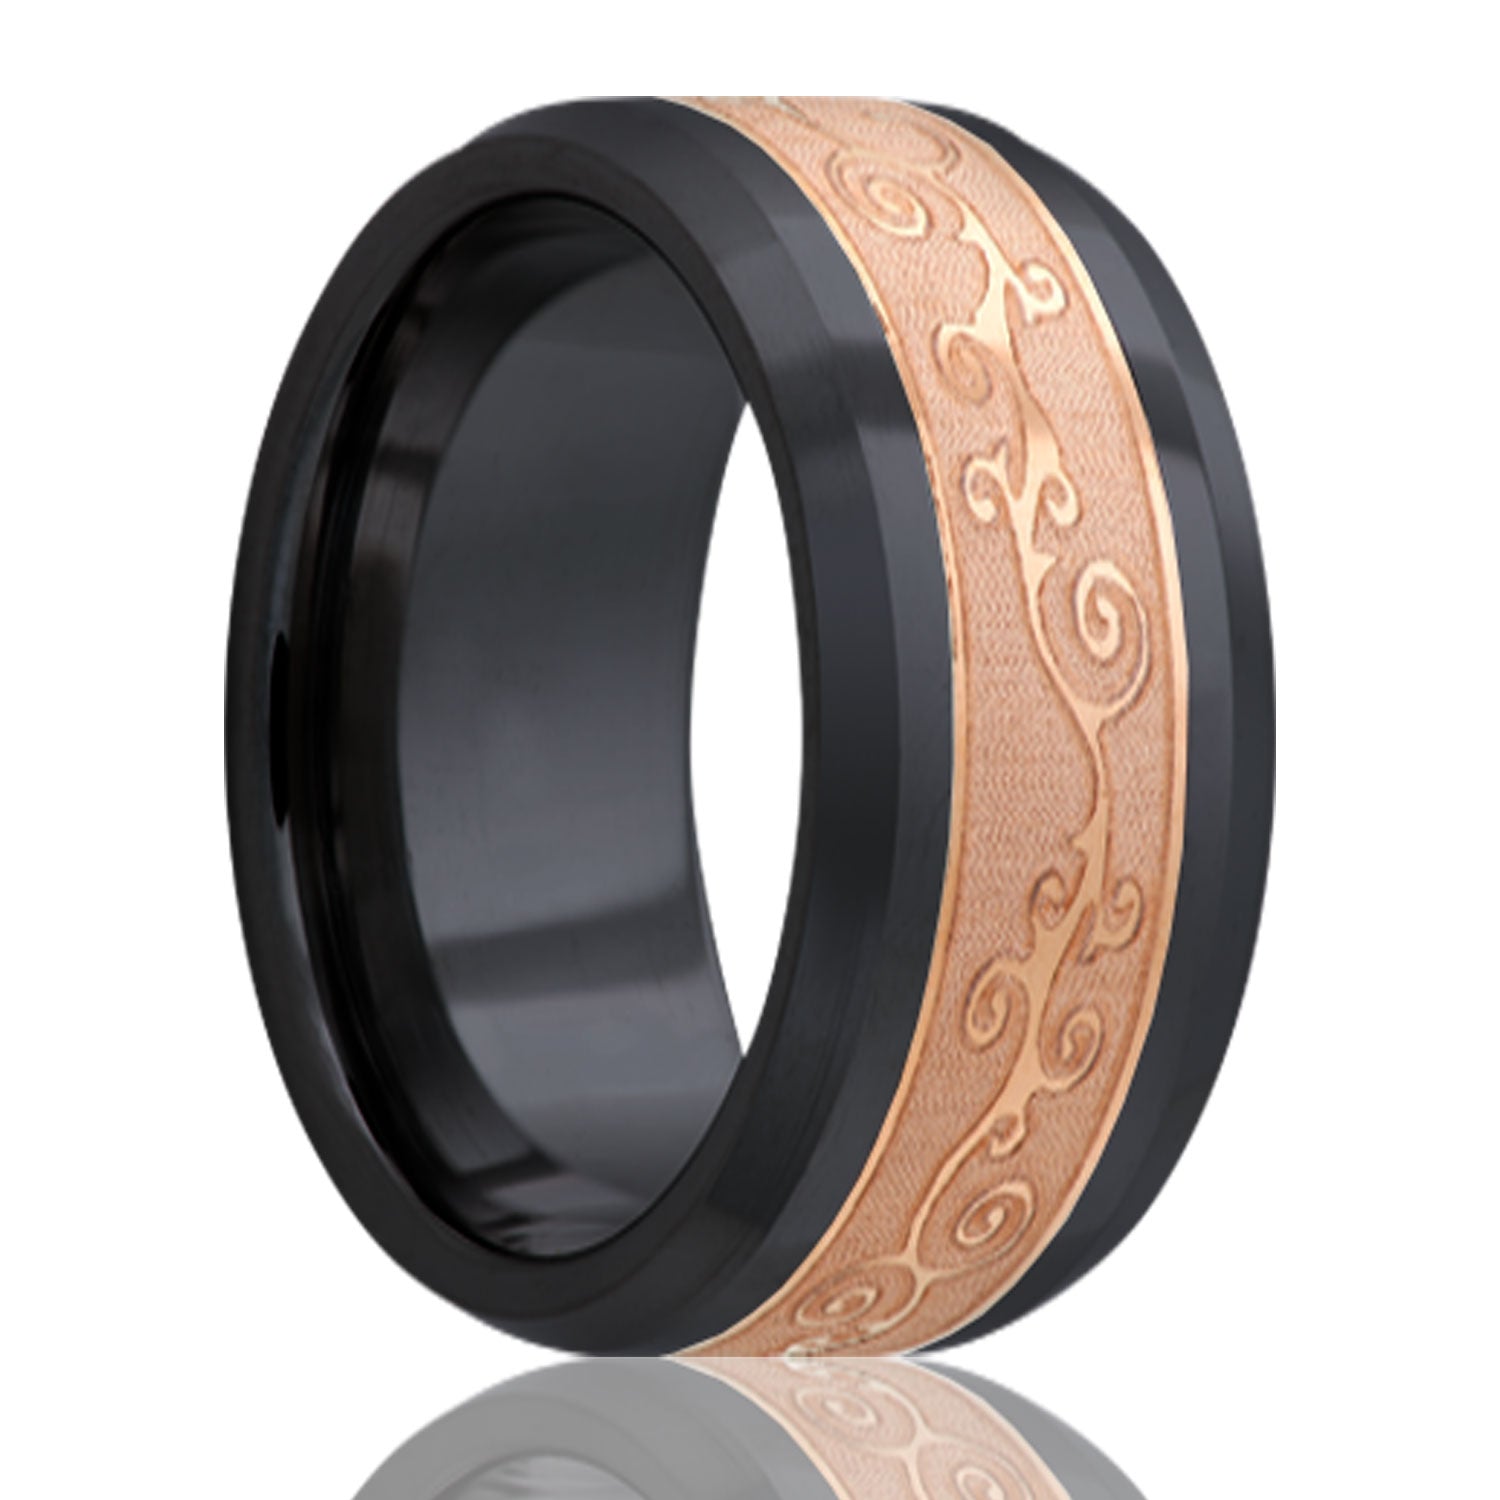 A scroll pattern copper inlay zirconium wedding band with beveled edges displayed on a neutral white background.